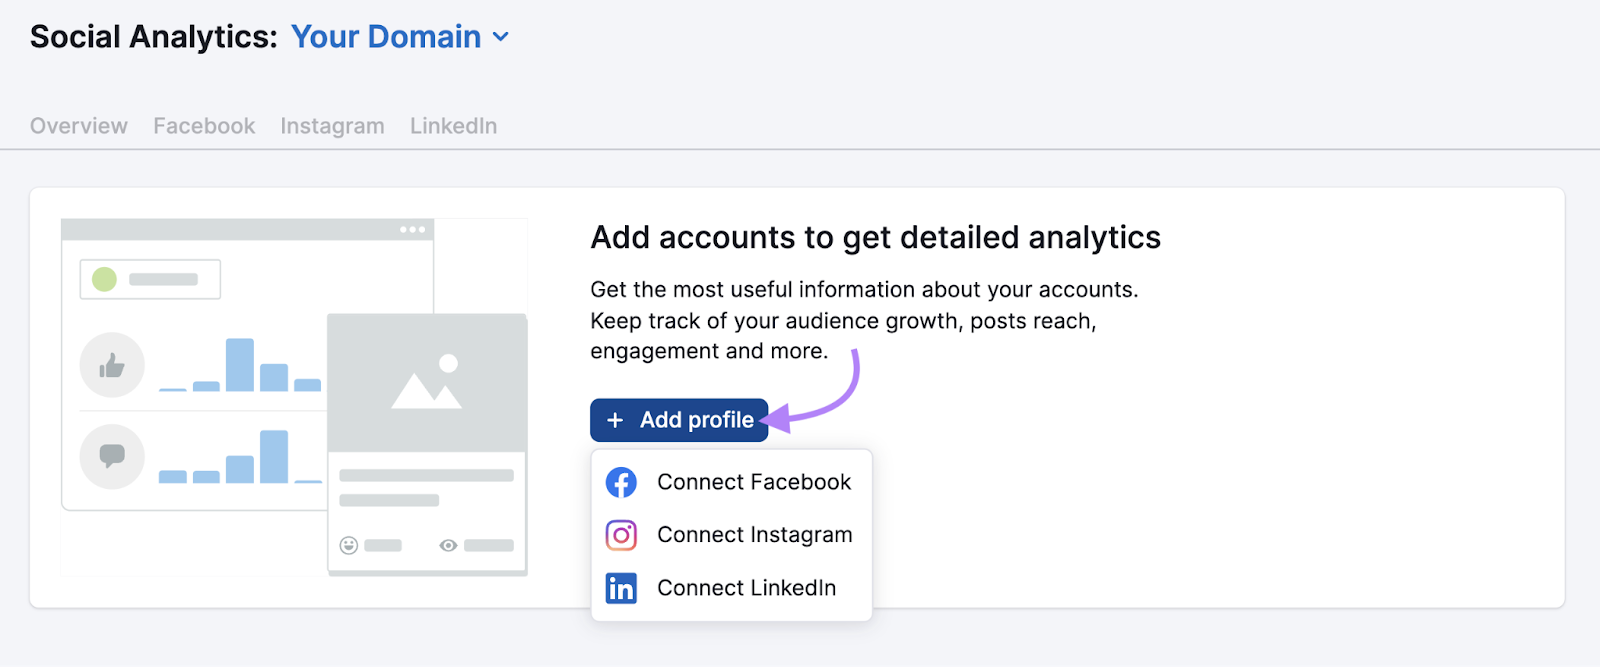 “+ Add profile" button in Social Analytics tool